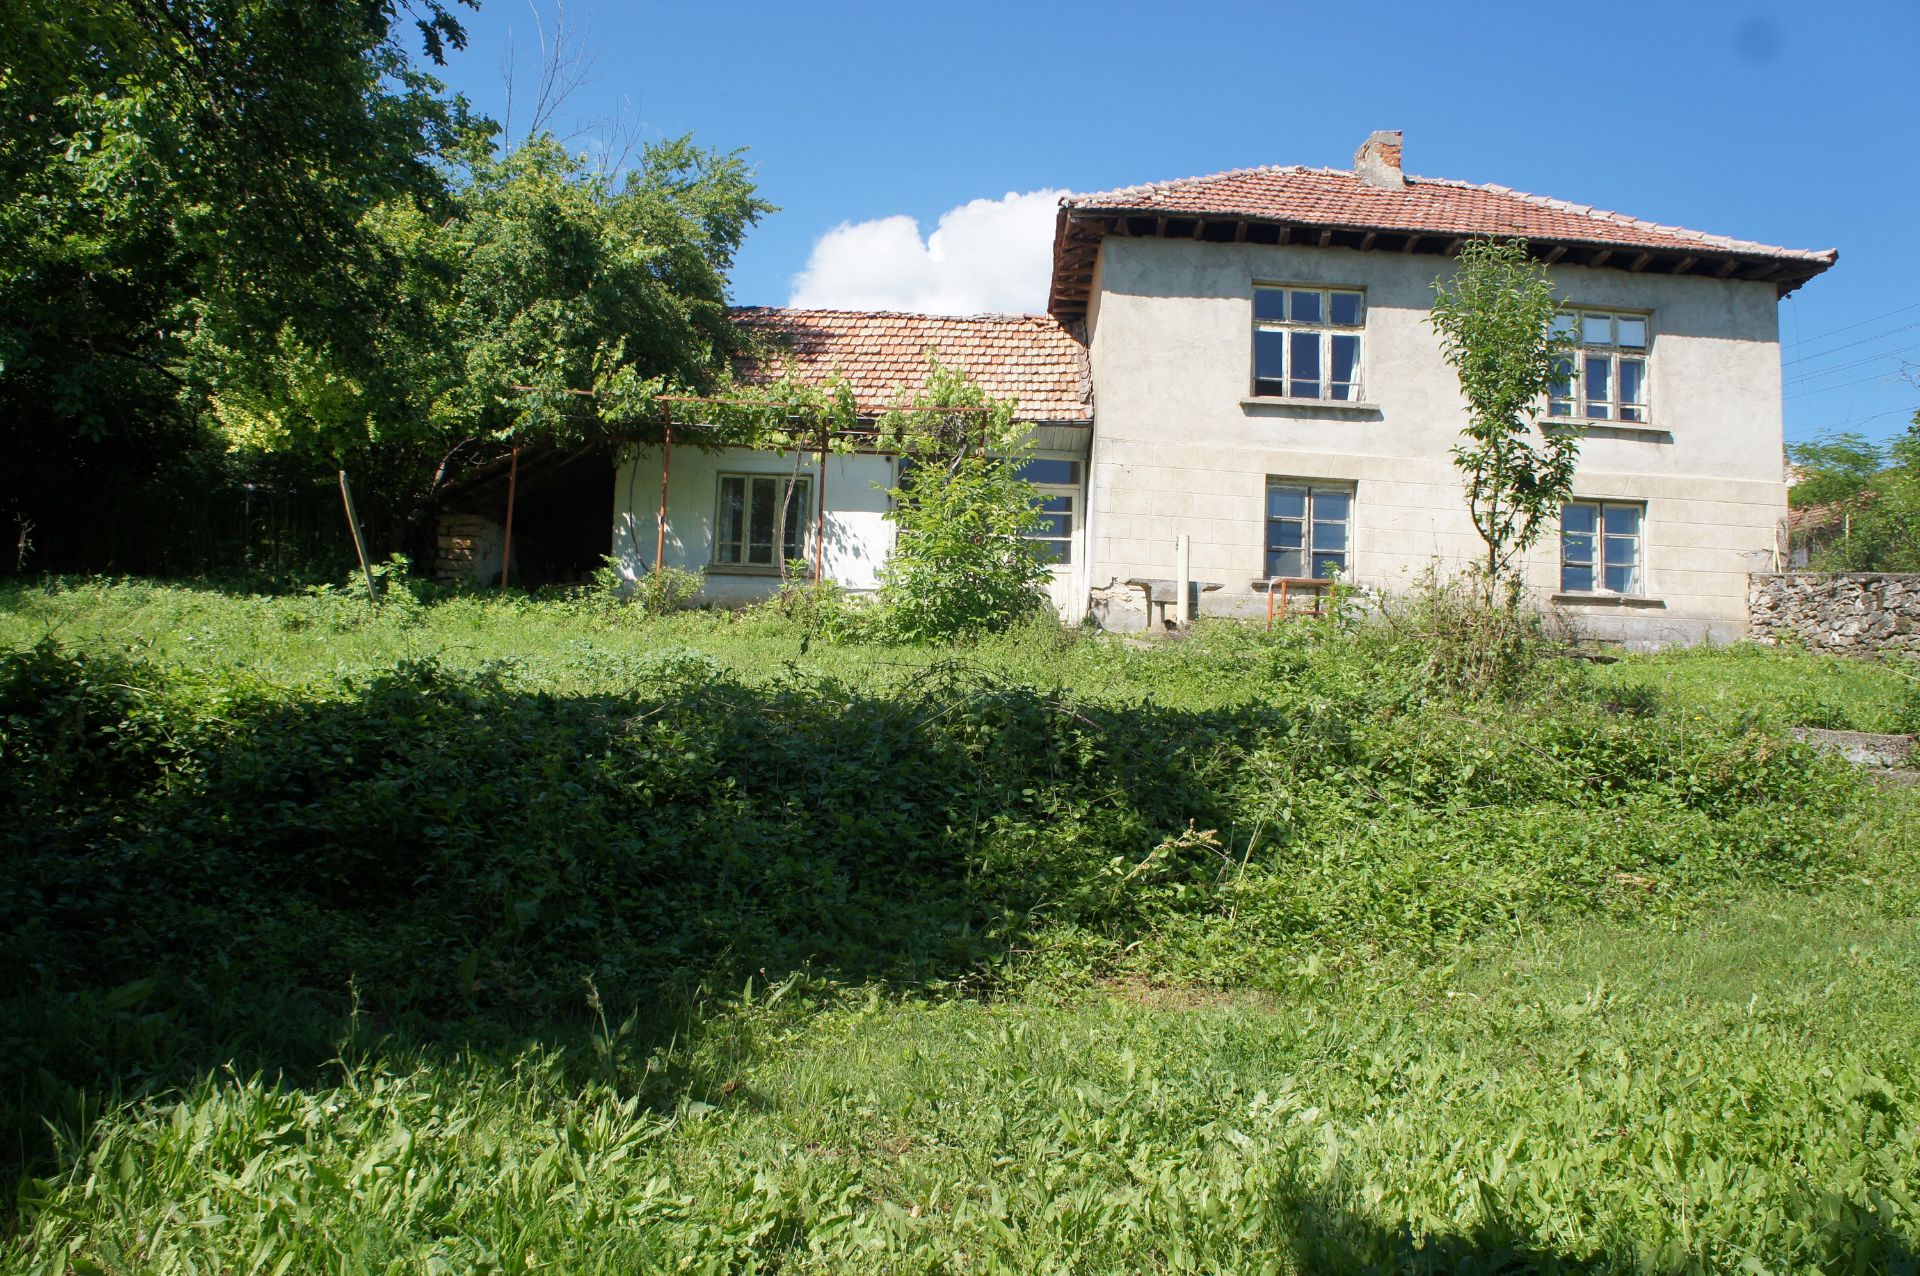 Huge freehold home and land in Bulgaria - near to Alexander Stambolisky dam and Waterfalls! - Image 4 of 74